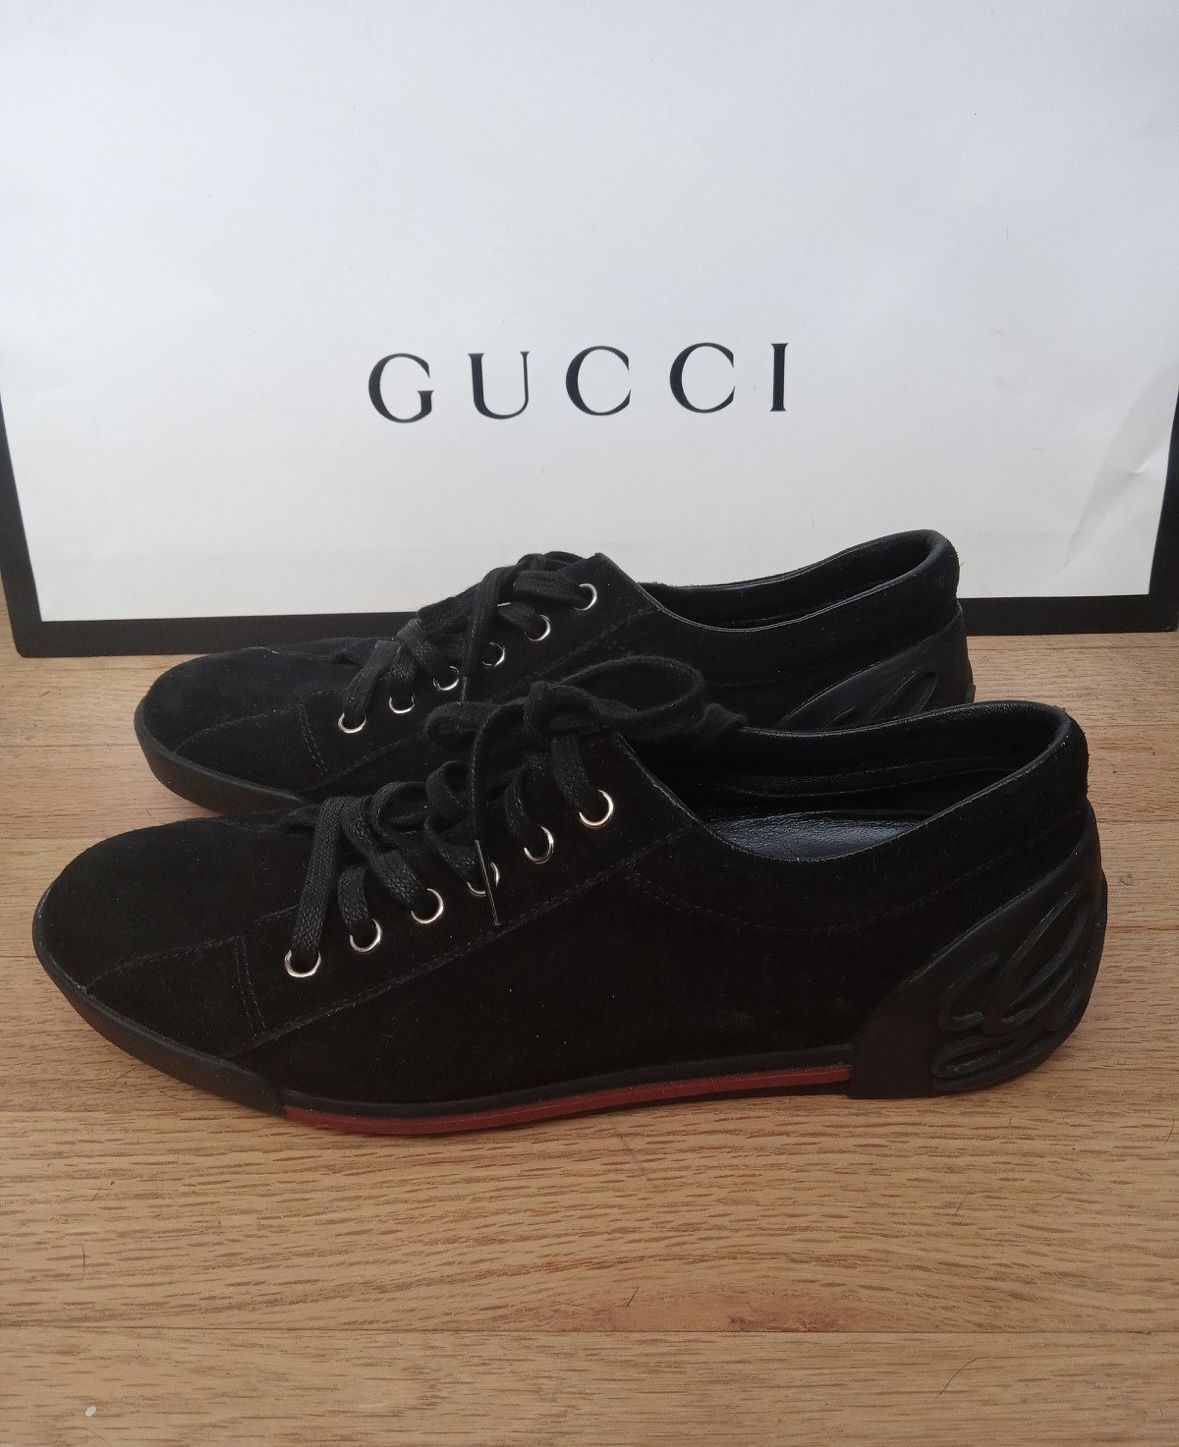 Gucci Women’s Shoes 37.5 Or Size 7